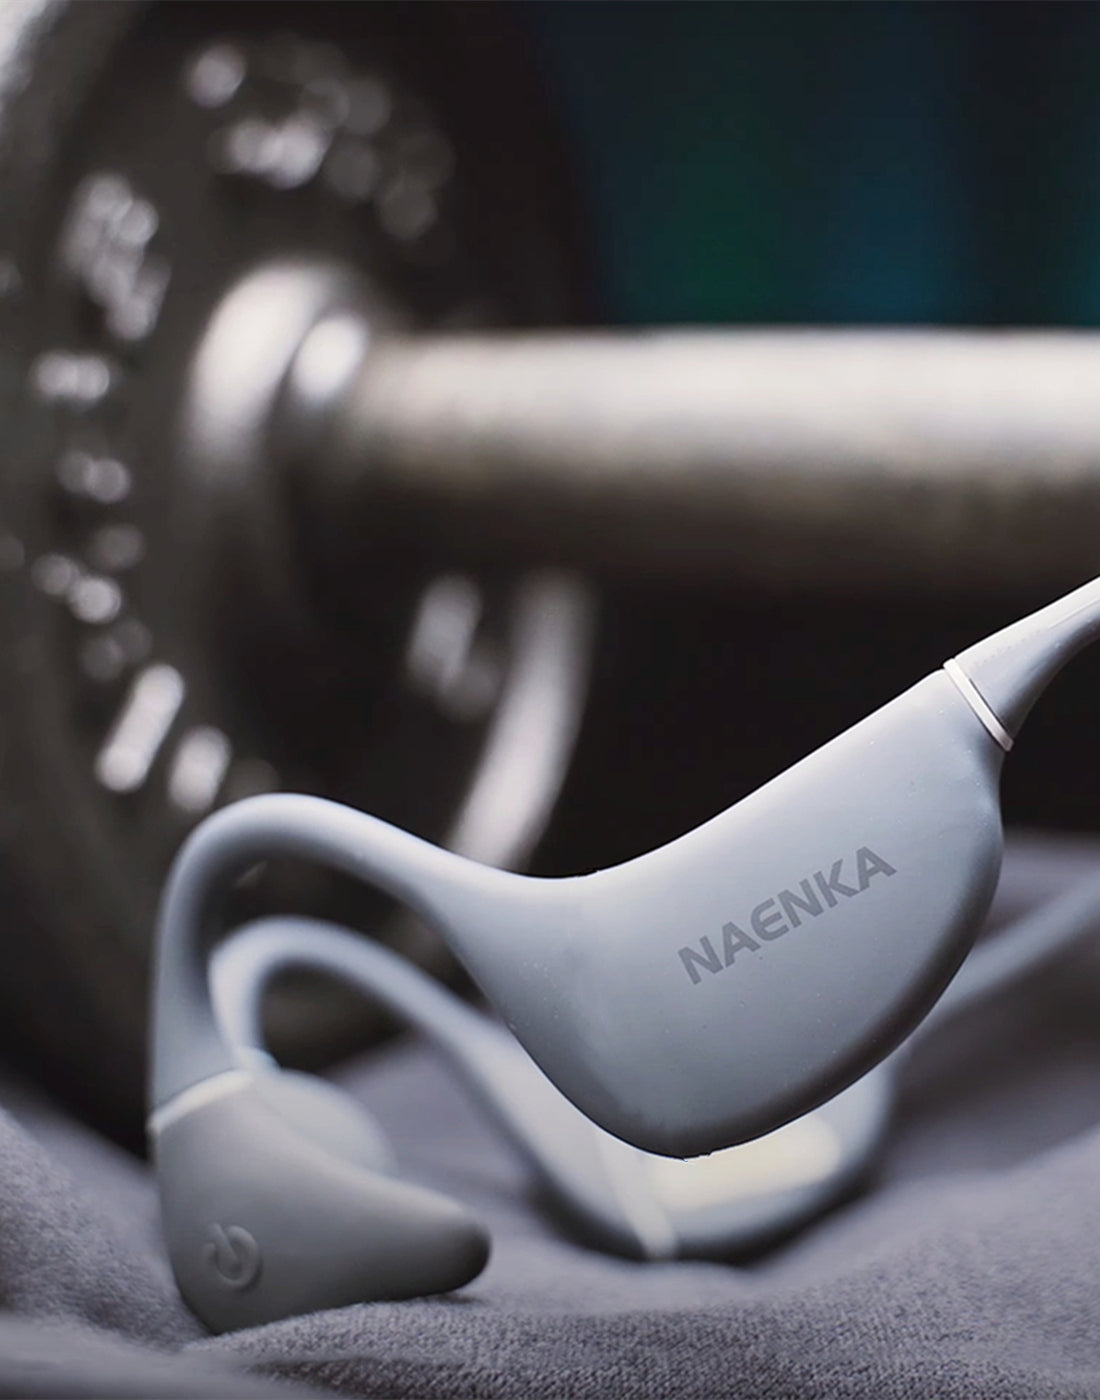 The gray Naenka bone conduction headphones are placed together with sports equipment